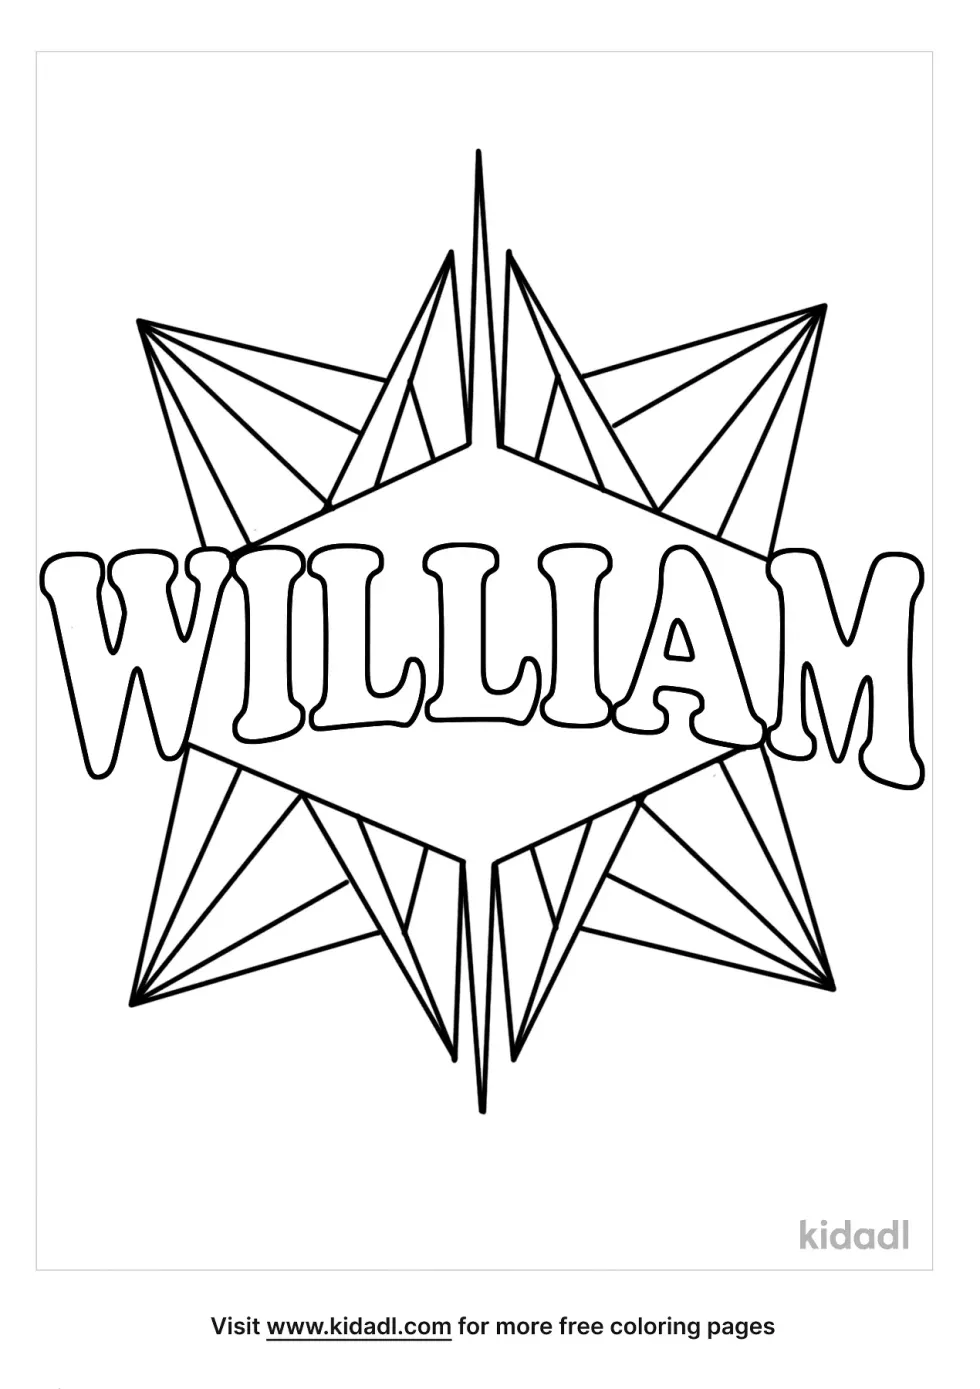 William Name Coloring Page